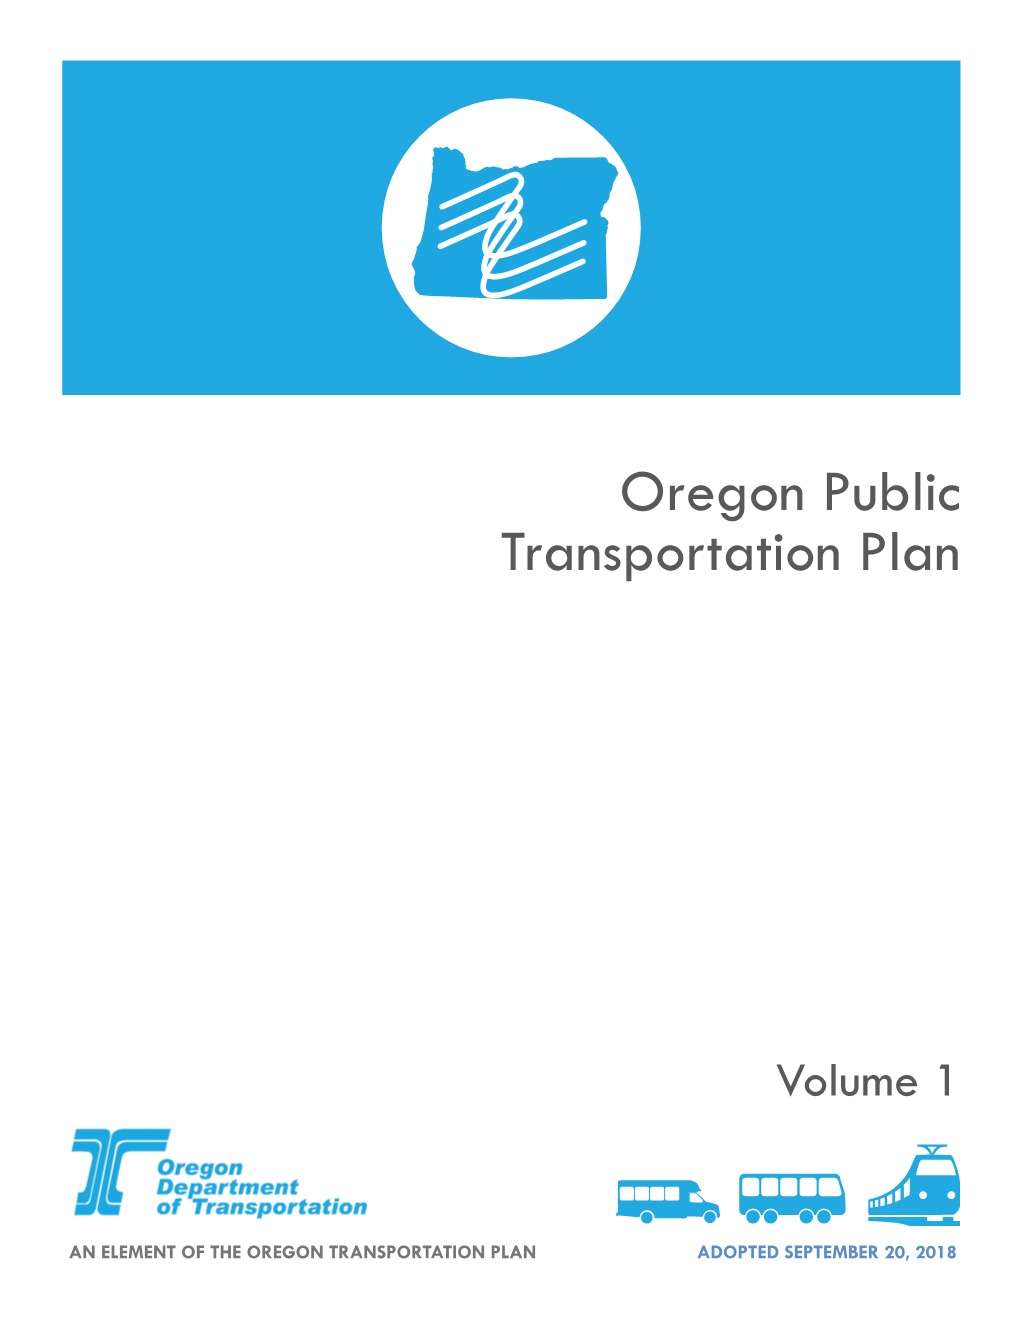 Oregon Public Transportation Plan (OPTP) Establishes Statewide Policies and Strategies Relating to Traditional Public Transportation Modes